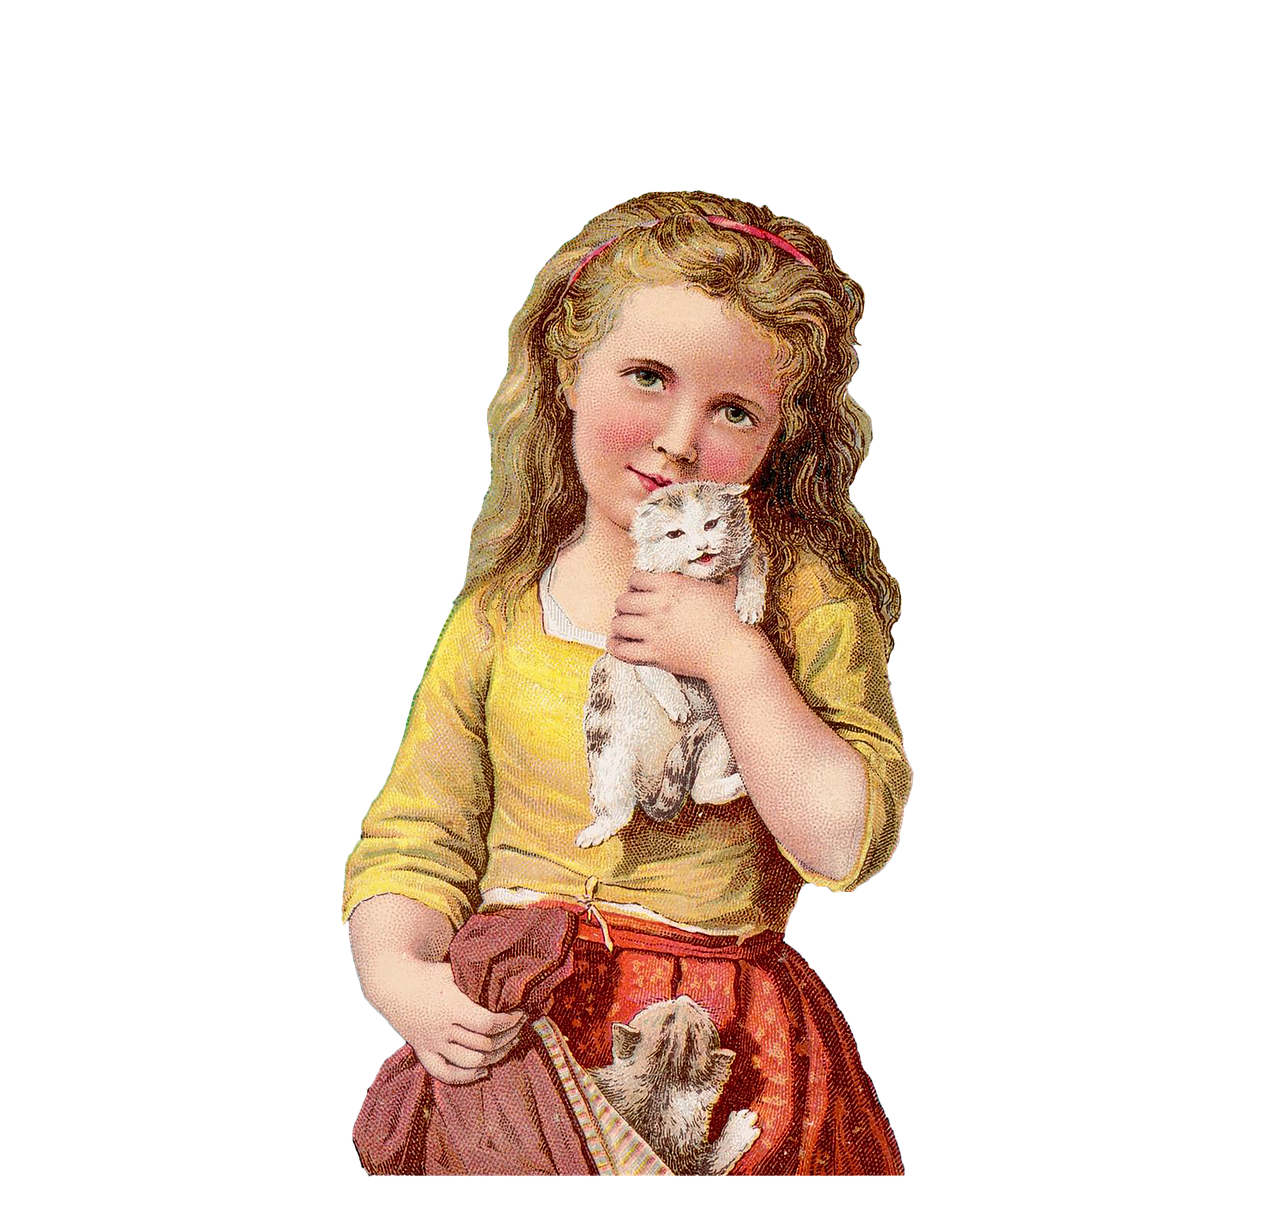 a little girl holding a kitten in her arms, inspired by Sophie Anderson, romanticism, cut out collage, high quality screenshot, graphic 4 5, with a black background